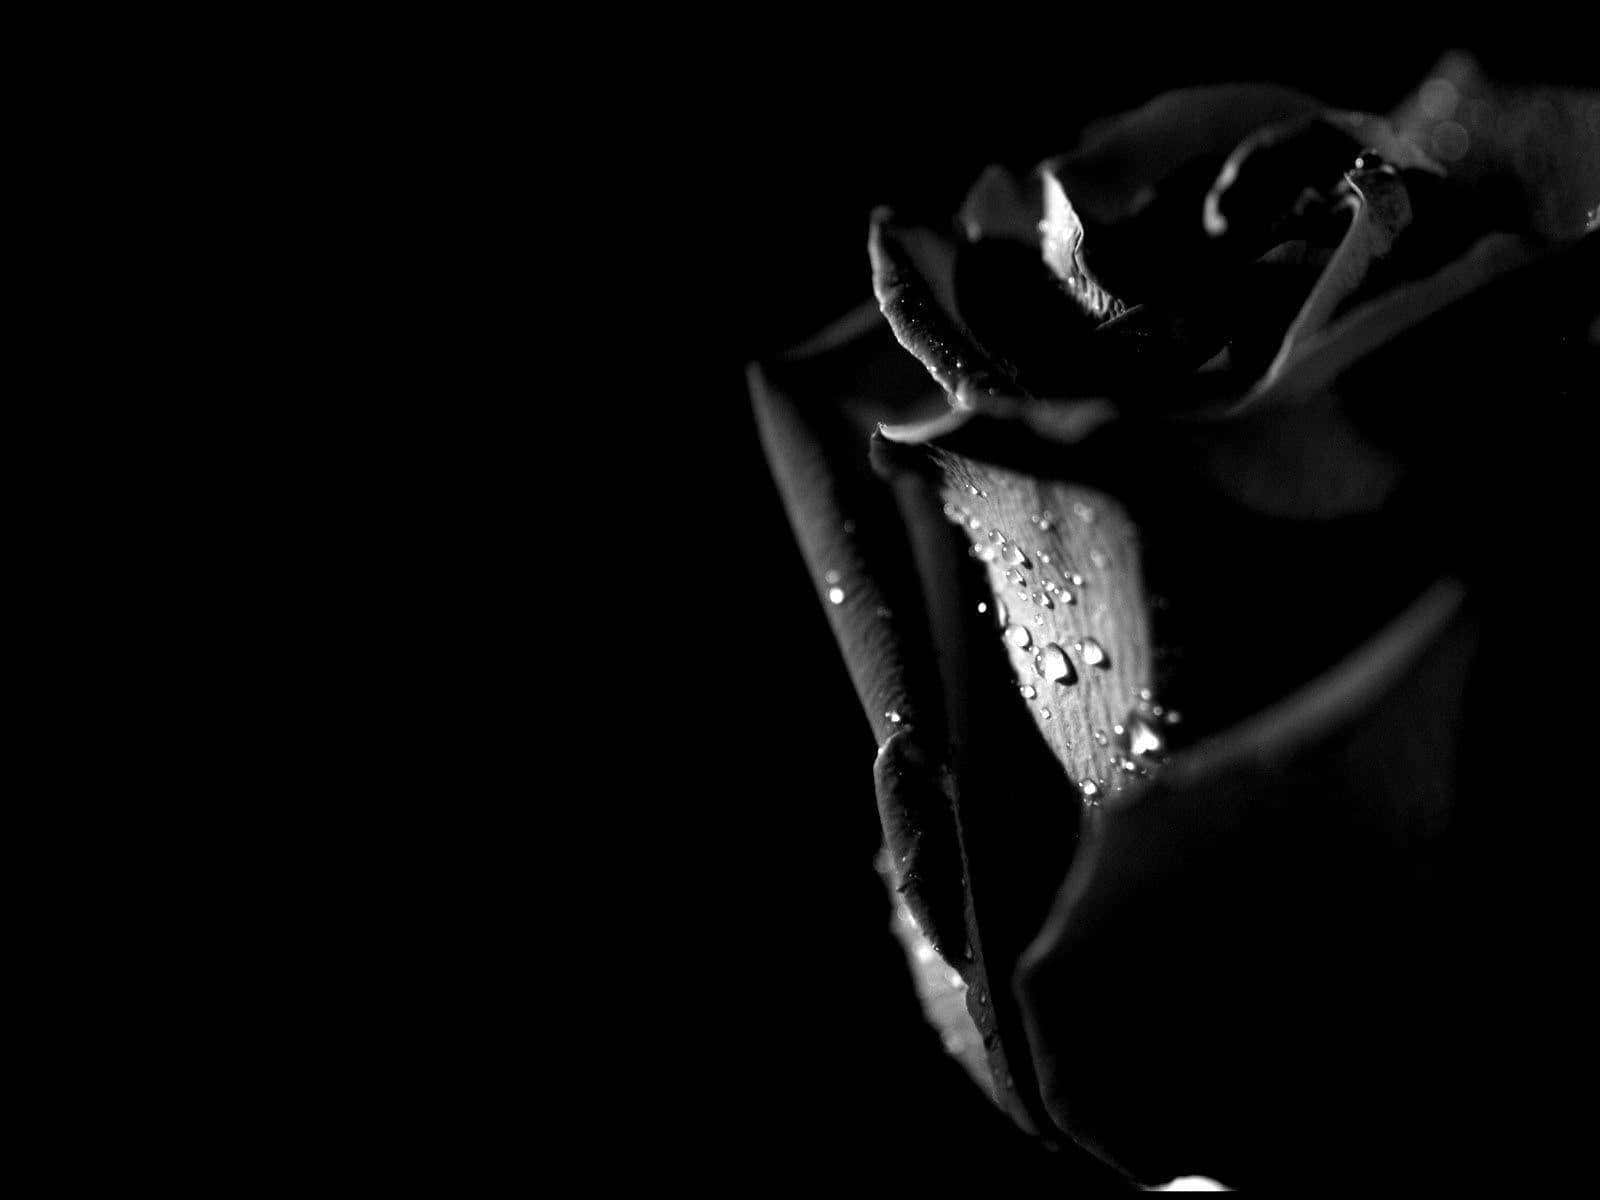 A single black rose with a hint of green against a black background.